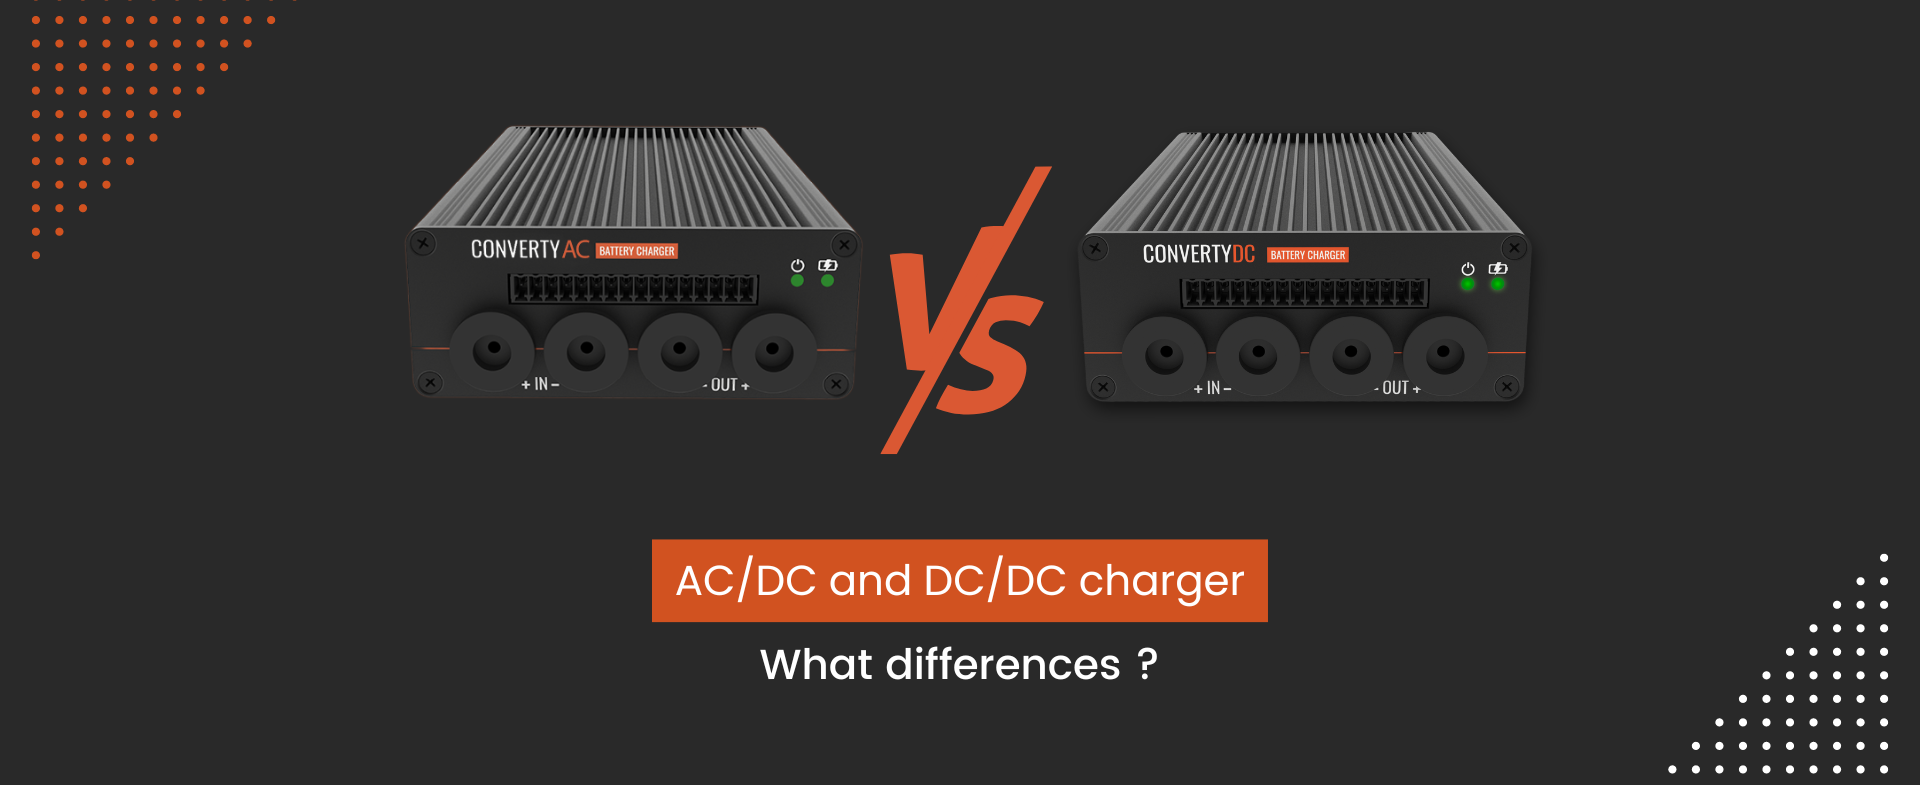 ACDC and DCDC charger: what differences?